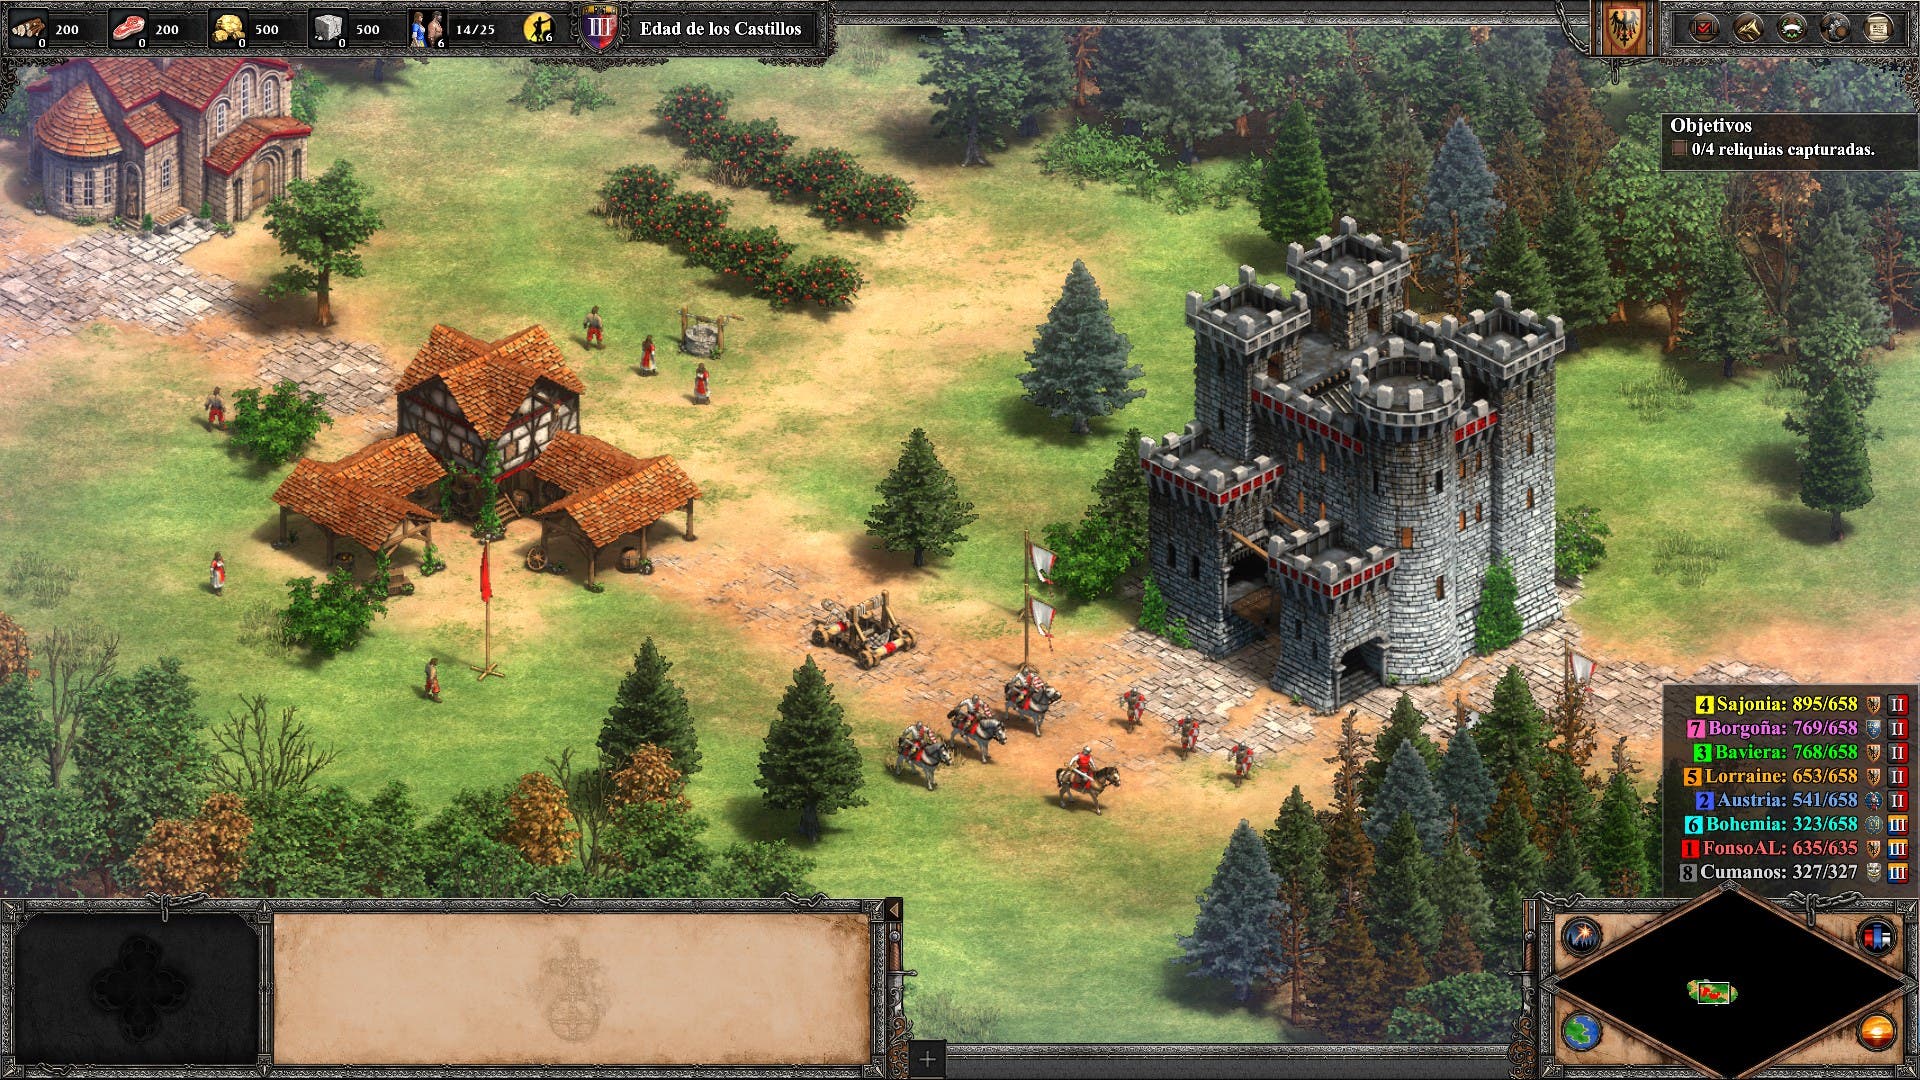 age of empires 2 definitive edition tips and tricks